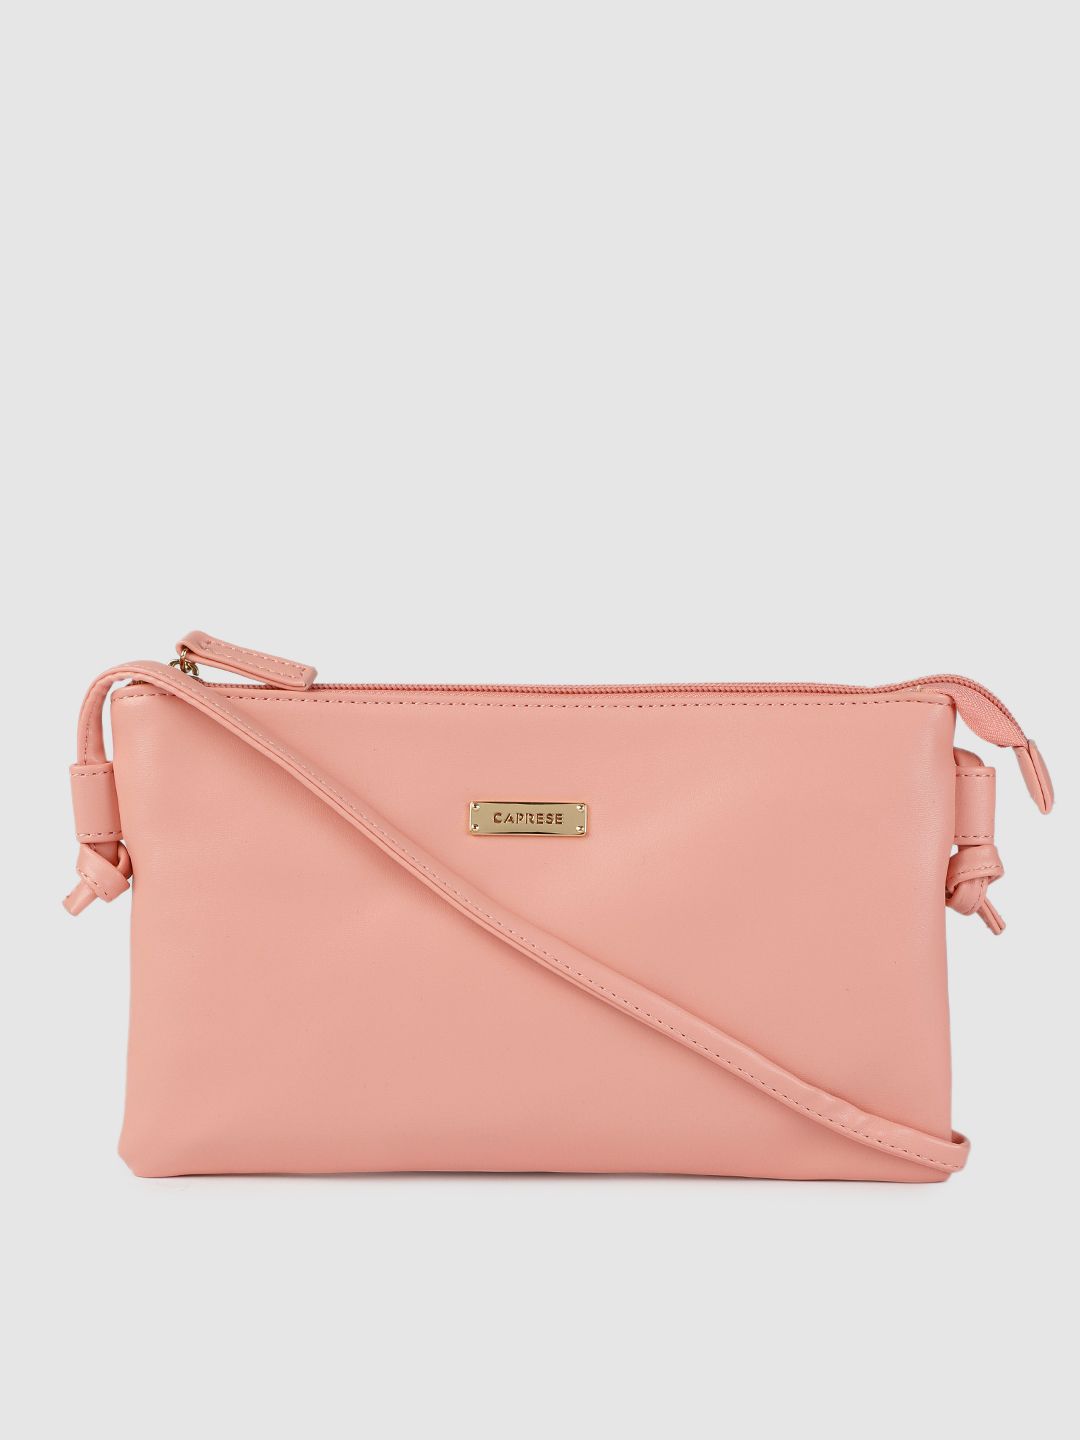 Caprese Pink Leather Structured Sling Bag Price in India